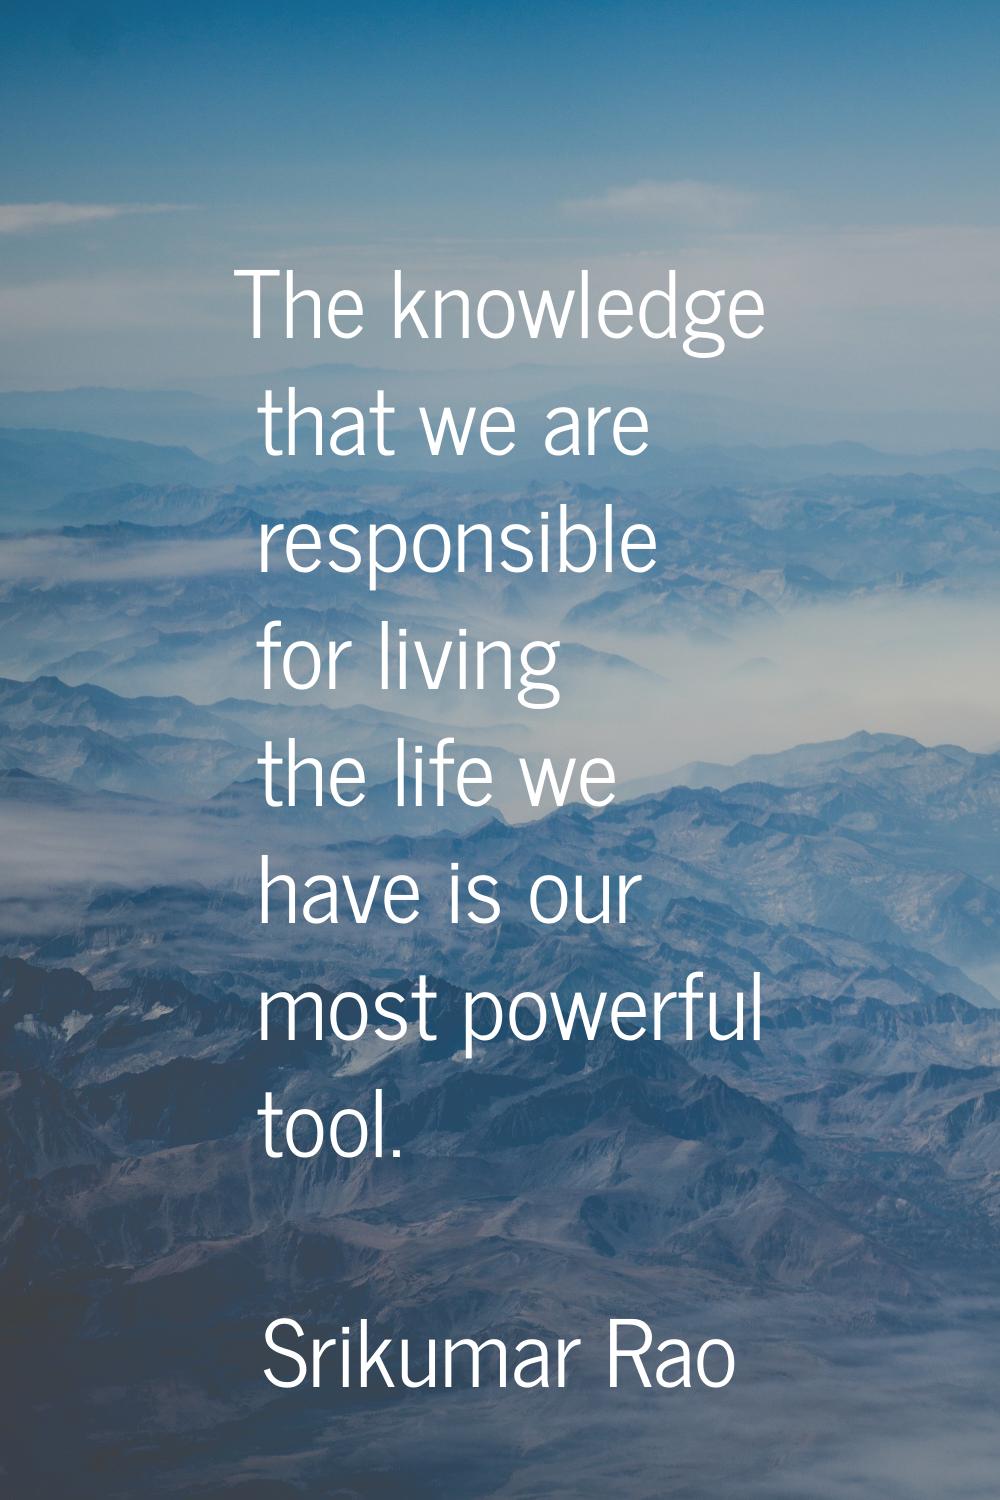 The knowledge that we are responsible for living the life we have is our most powerful tool.